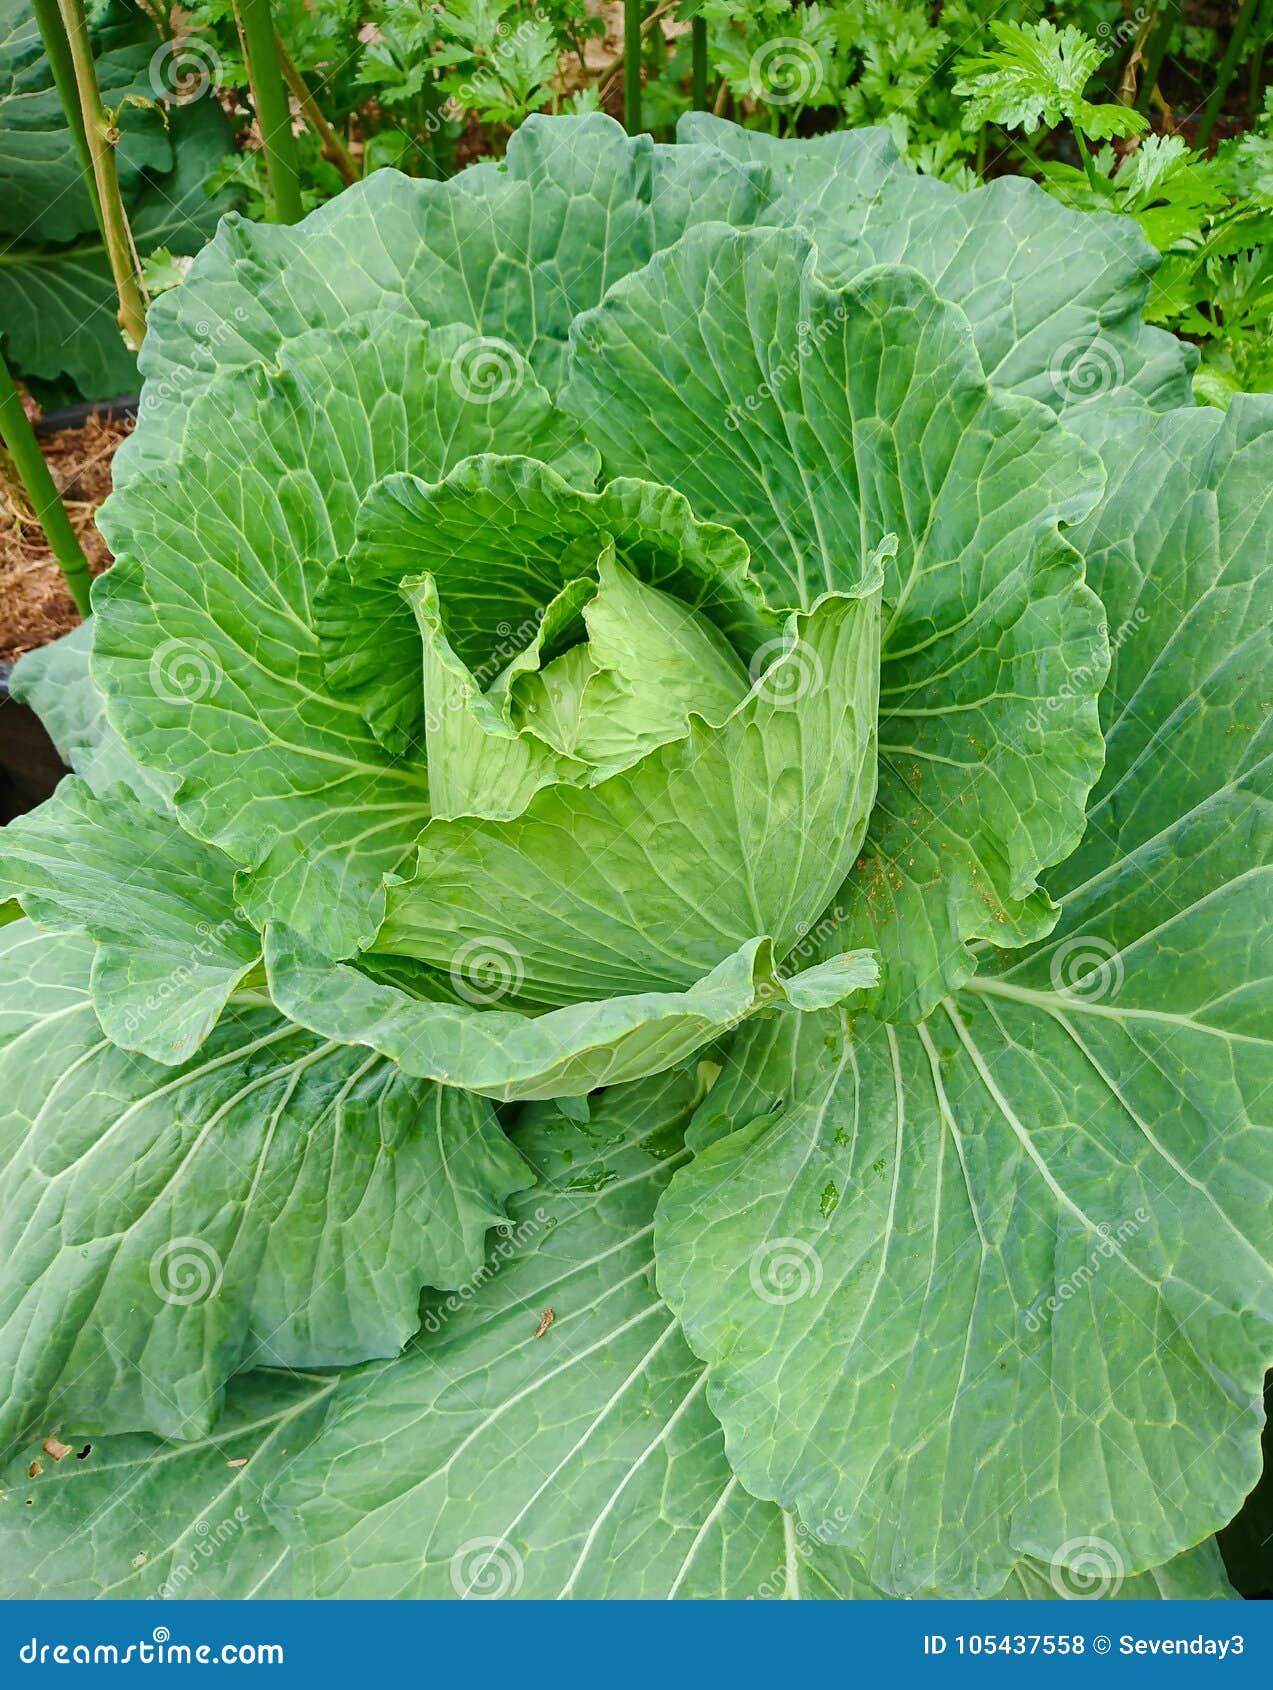 green cabbage or cruciferae in the organic plots.